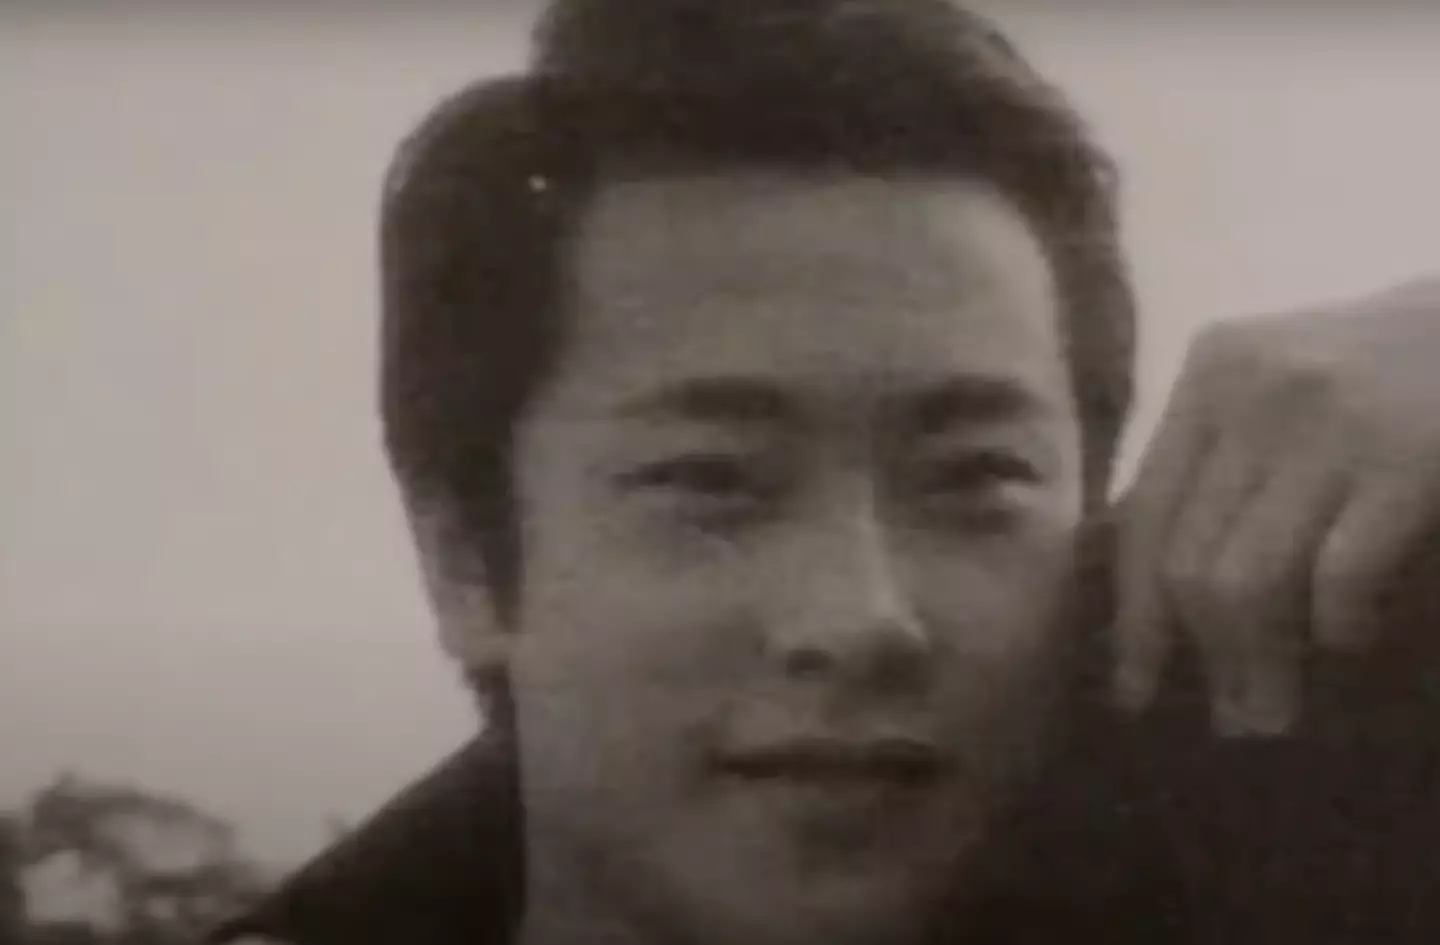 Joji Obara was arrested and charged in connection with Lucie’s disappearance.